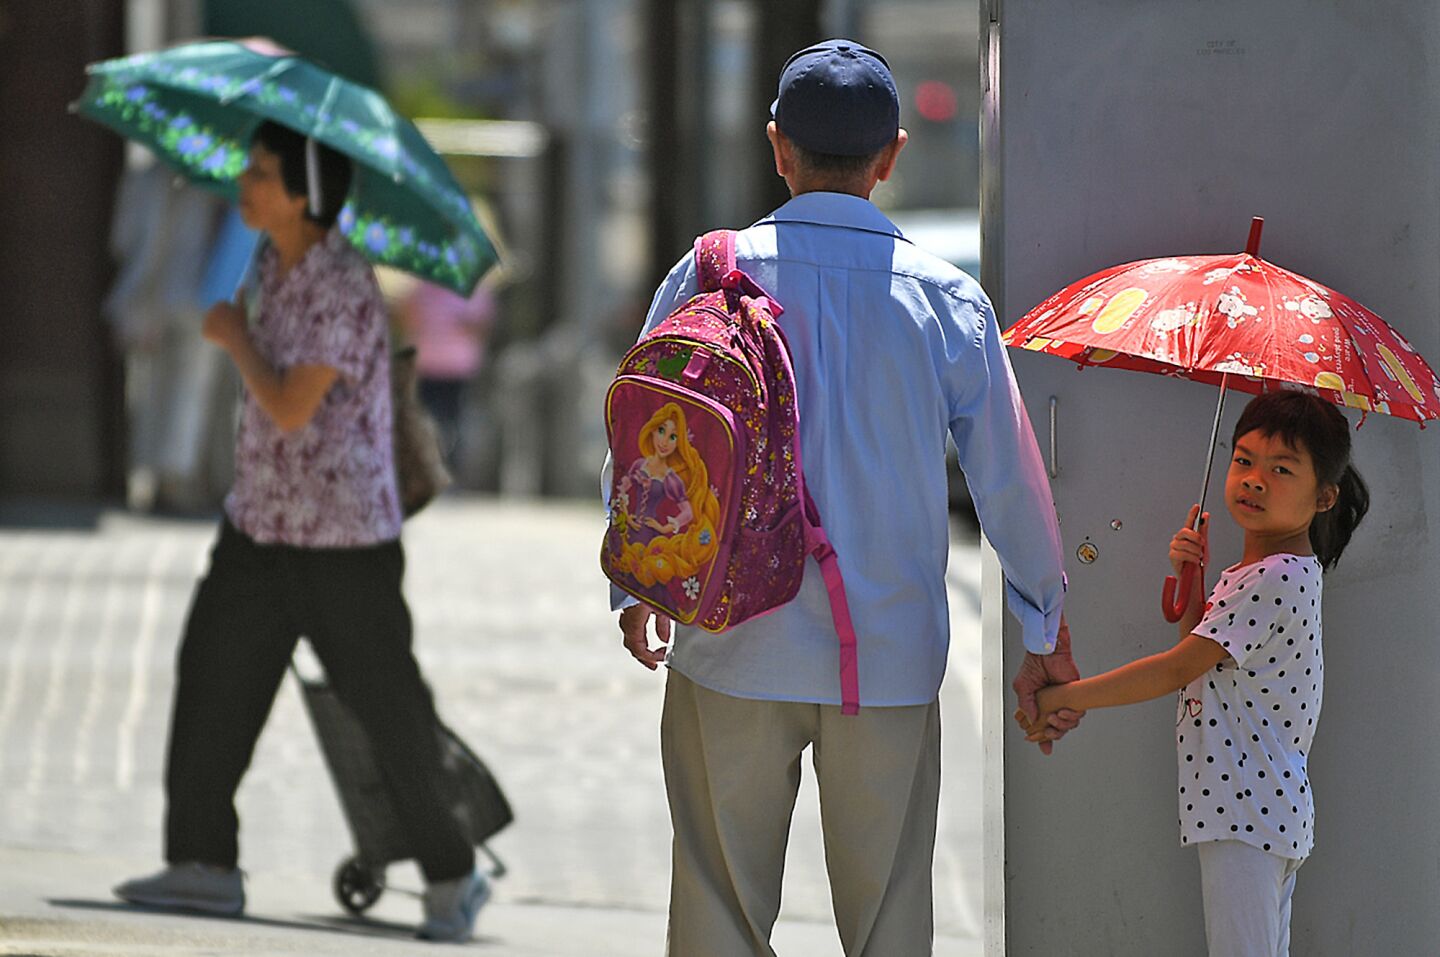 In Chinatown, pedestrians use umbrellas to shield themselves from the sun in 91 degree weather on Friday.